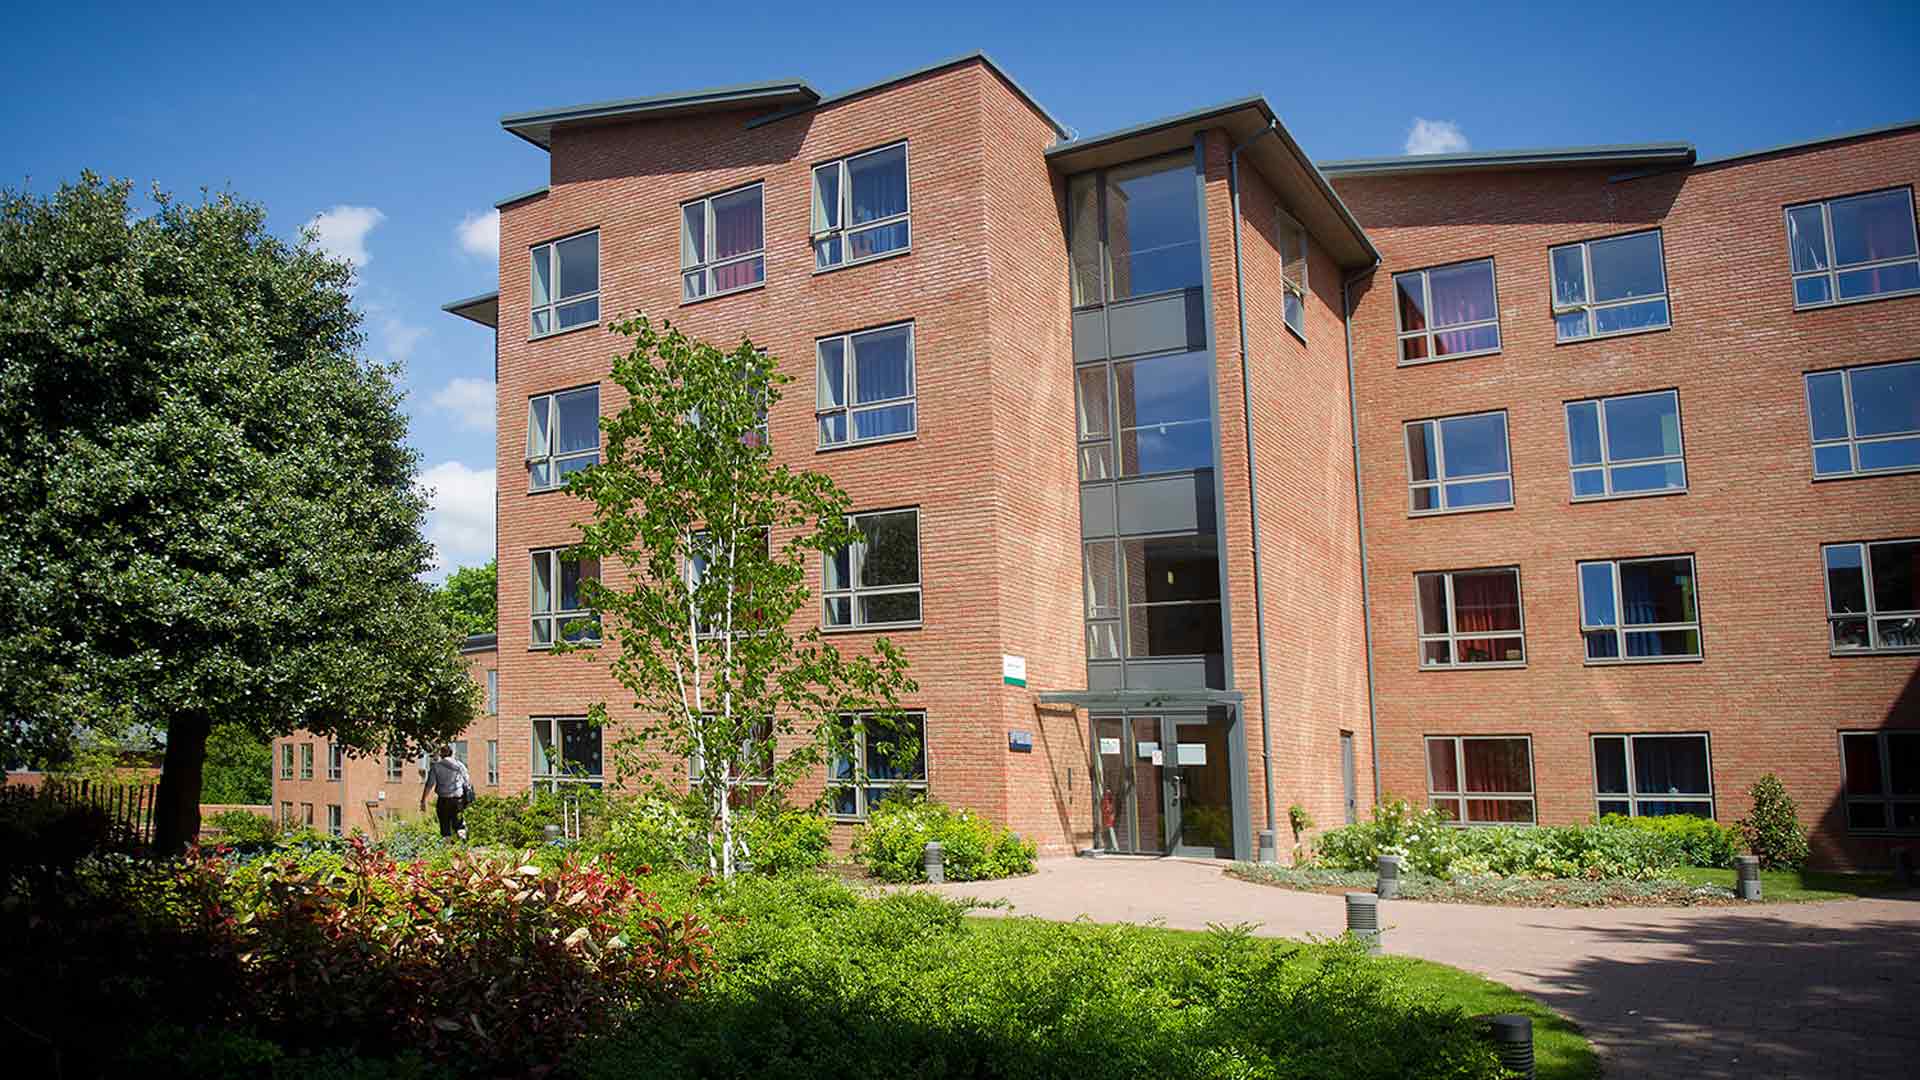 Compare our halls of residence, Study